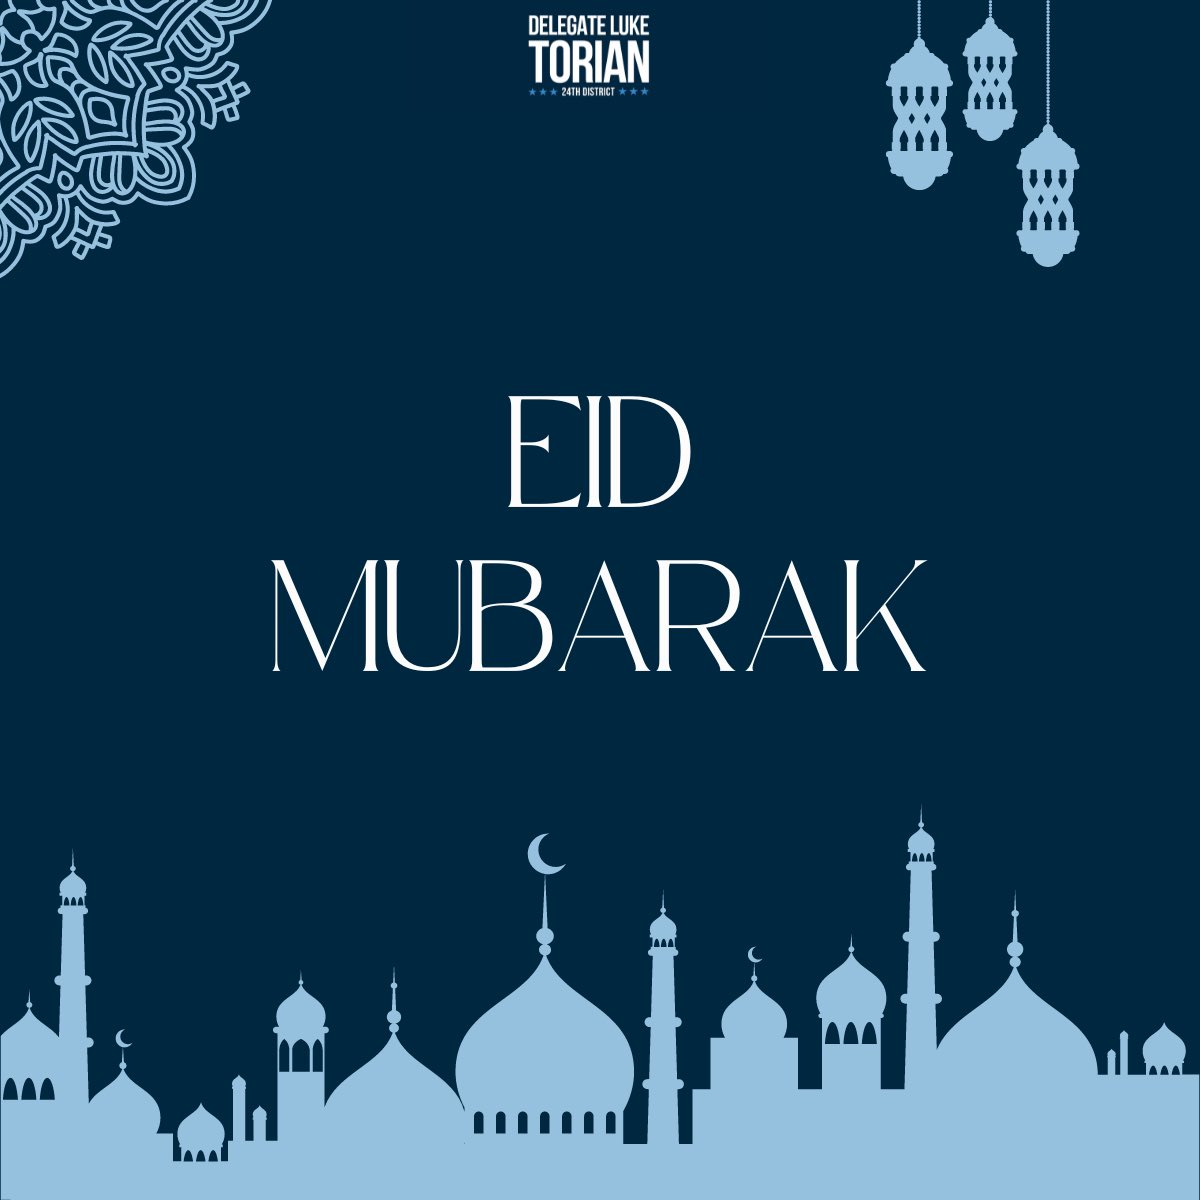 As Ramadan comes to a close, I extend my warmest wishes and blessing to everyone observing Eid al-Fitr. May the end of this holy month bring peace, happiness and prosperity to all communities. Eid Mubarak!